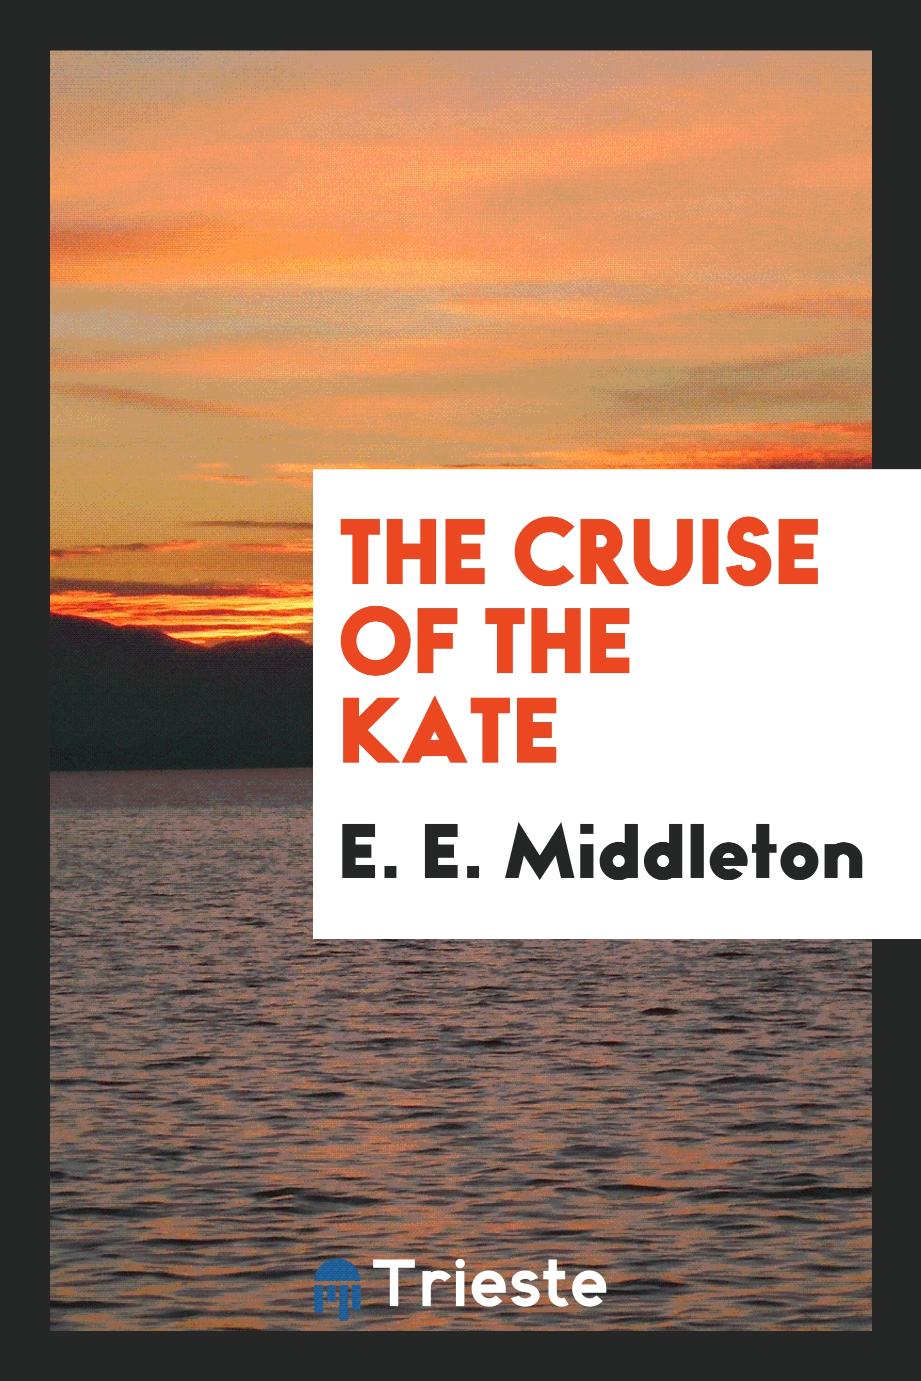 The Cruise of The Kate